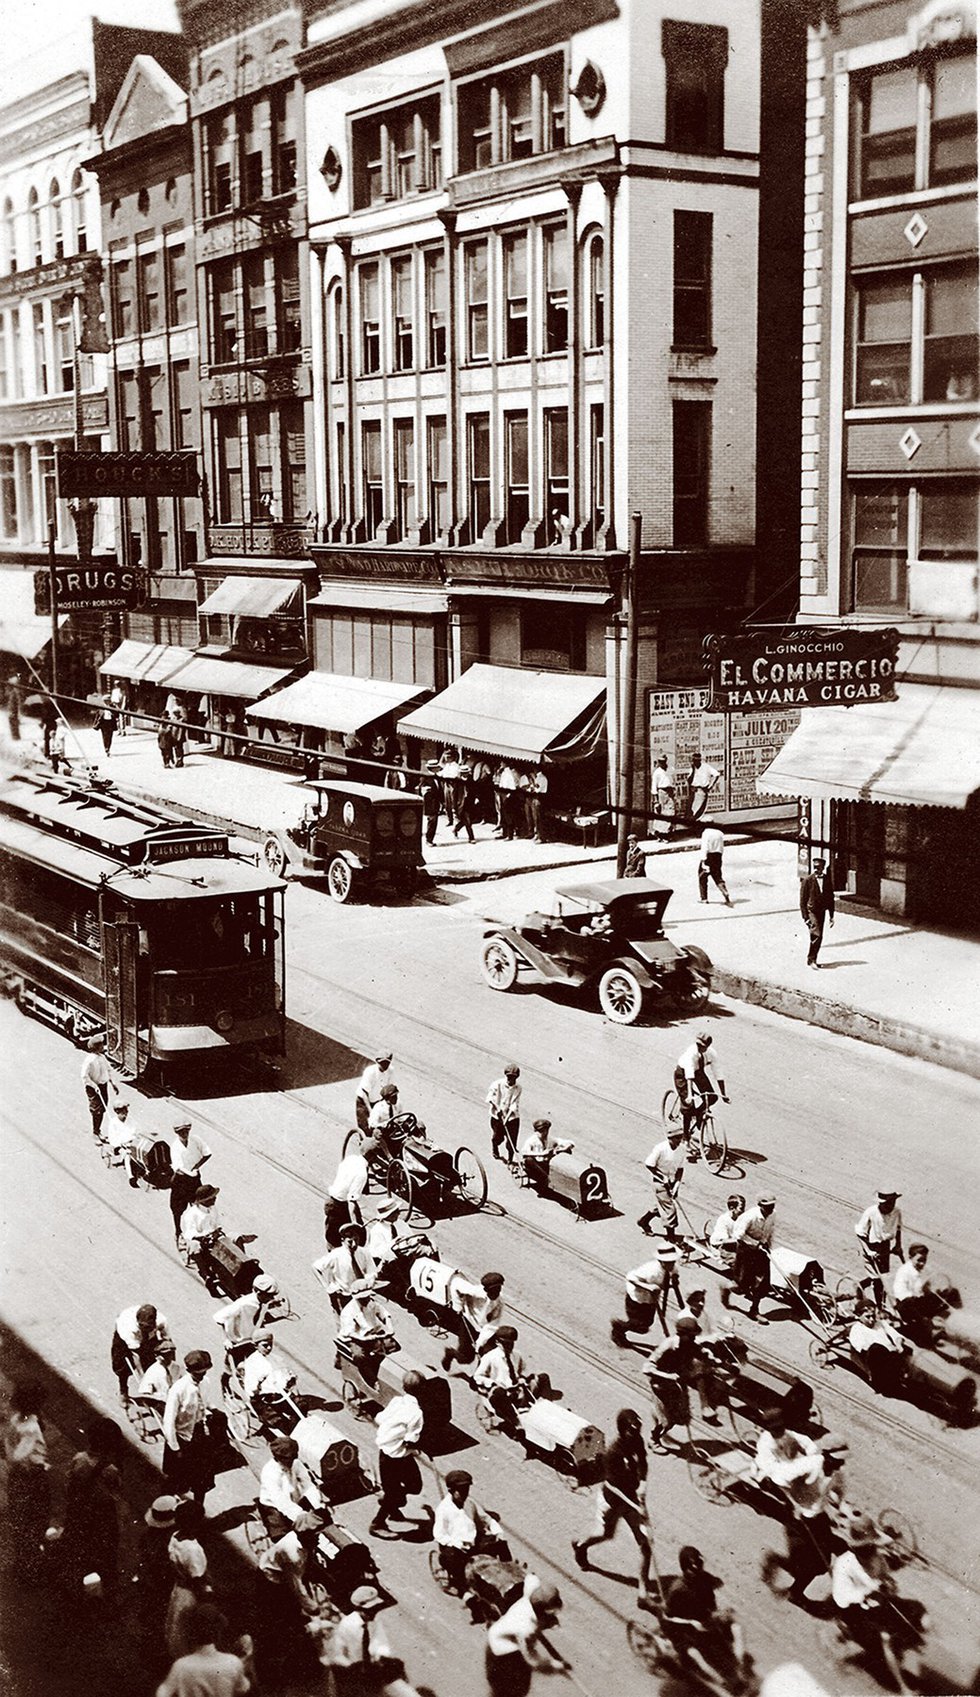 A parade of soapbox derby cars, pushed from behind, makes its way down Main Street in front of a trolley. 